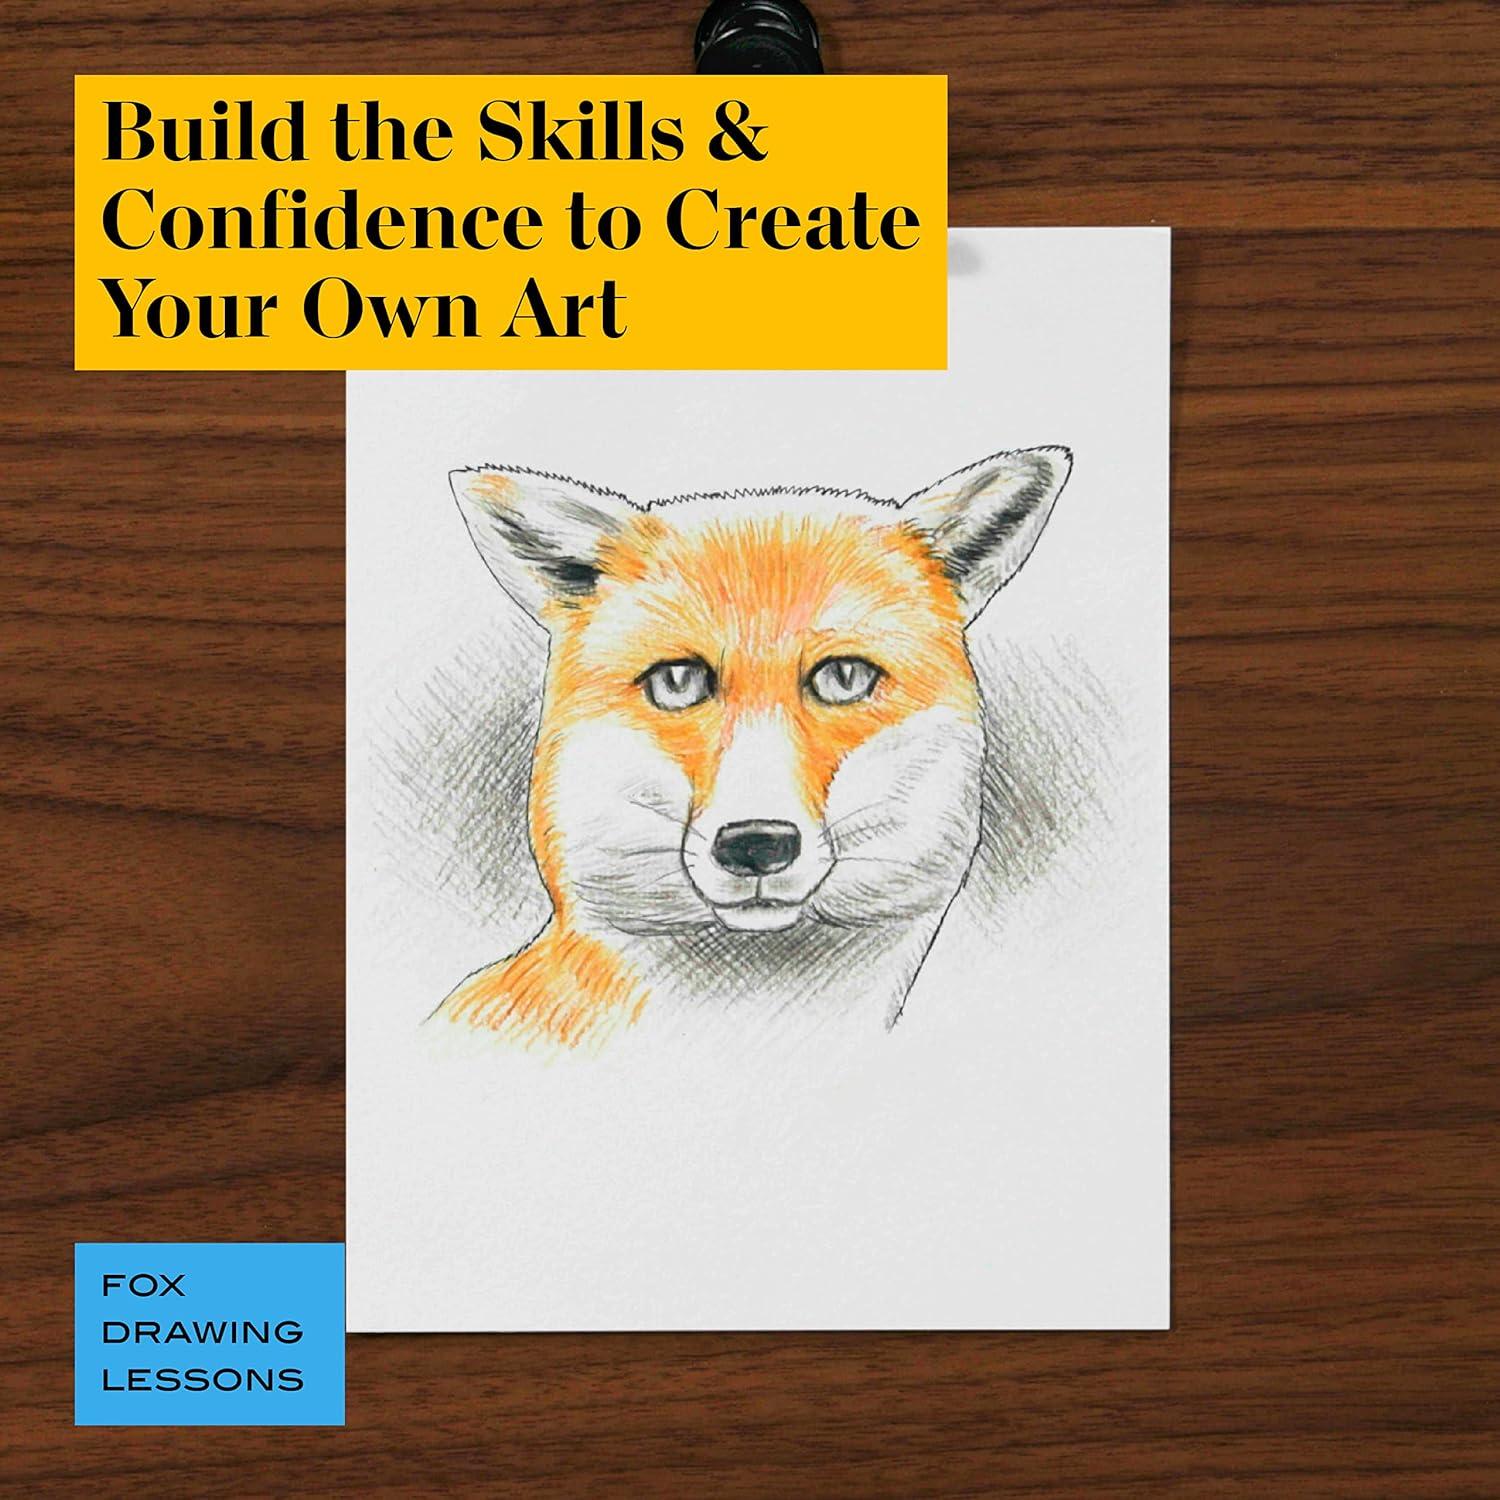 Prismacolor Technique Art Supplies with Digital Art Lessons Drawings Set  Level 1 How to Draw Animals with Colored Graphite Pencils and More Fox Drawing  Lesson 26 Count Animal Level 1